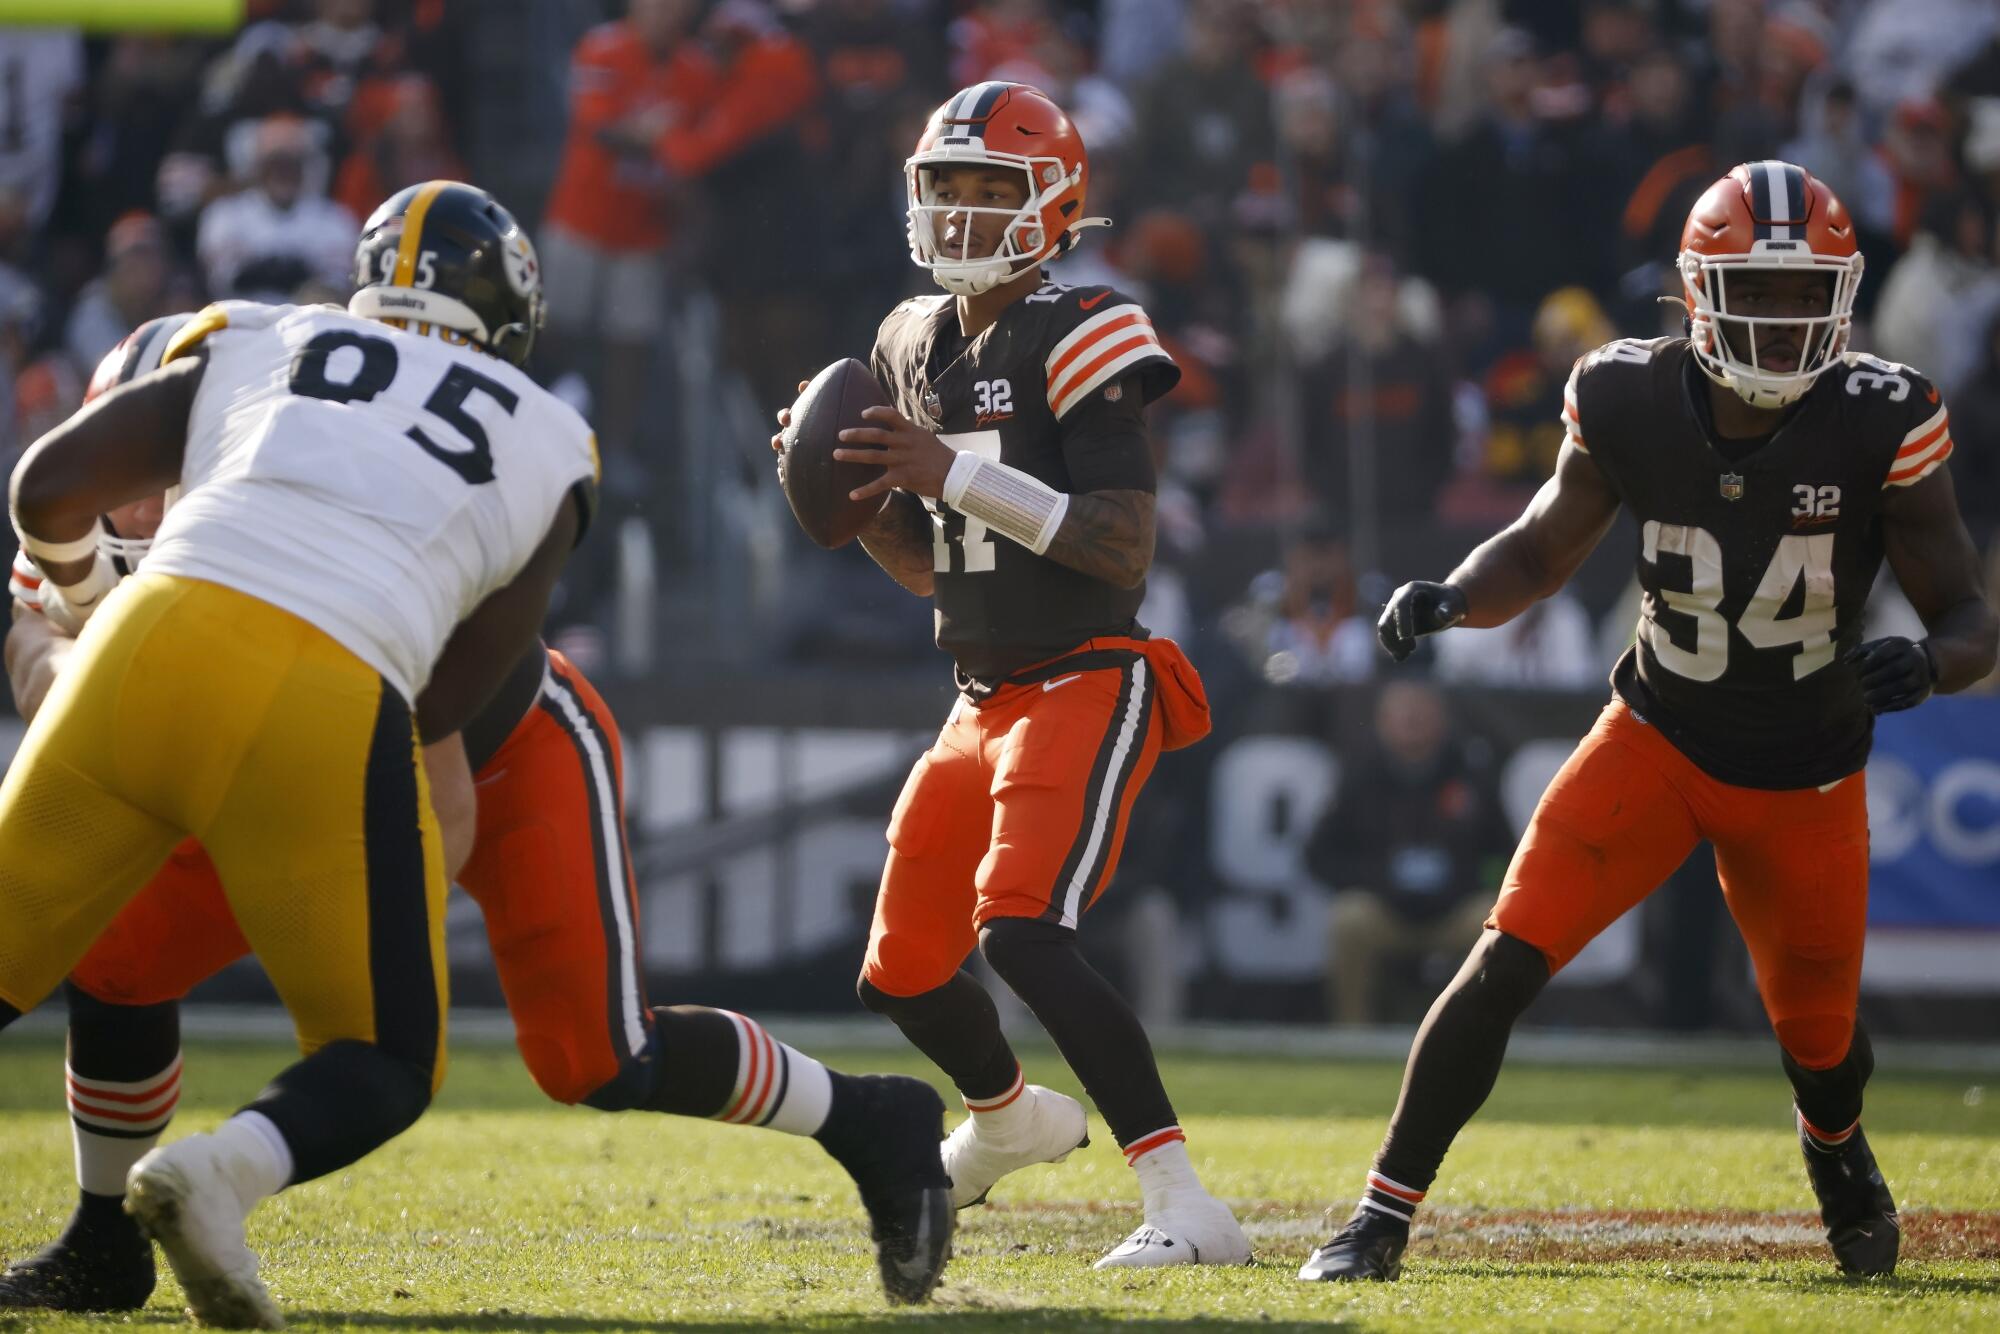 Browns quarterback Dorian Thompson-Robinson looks to throw the ball against the Steelers on Nov. 19 in Cleveland.